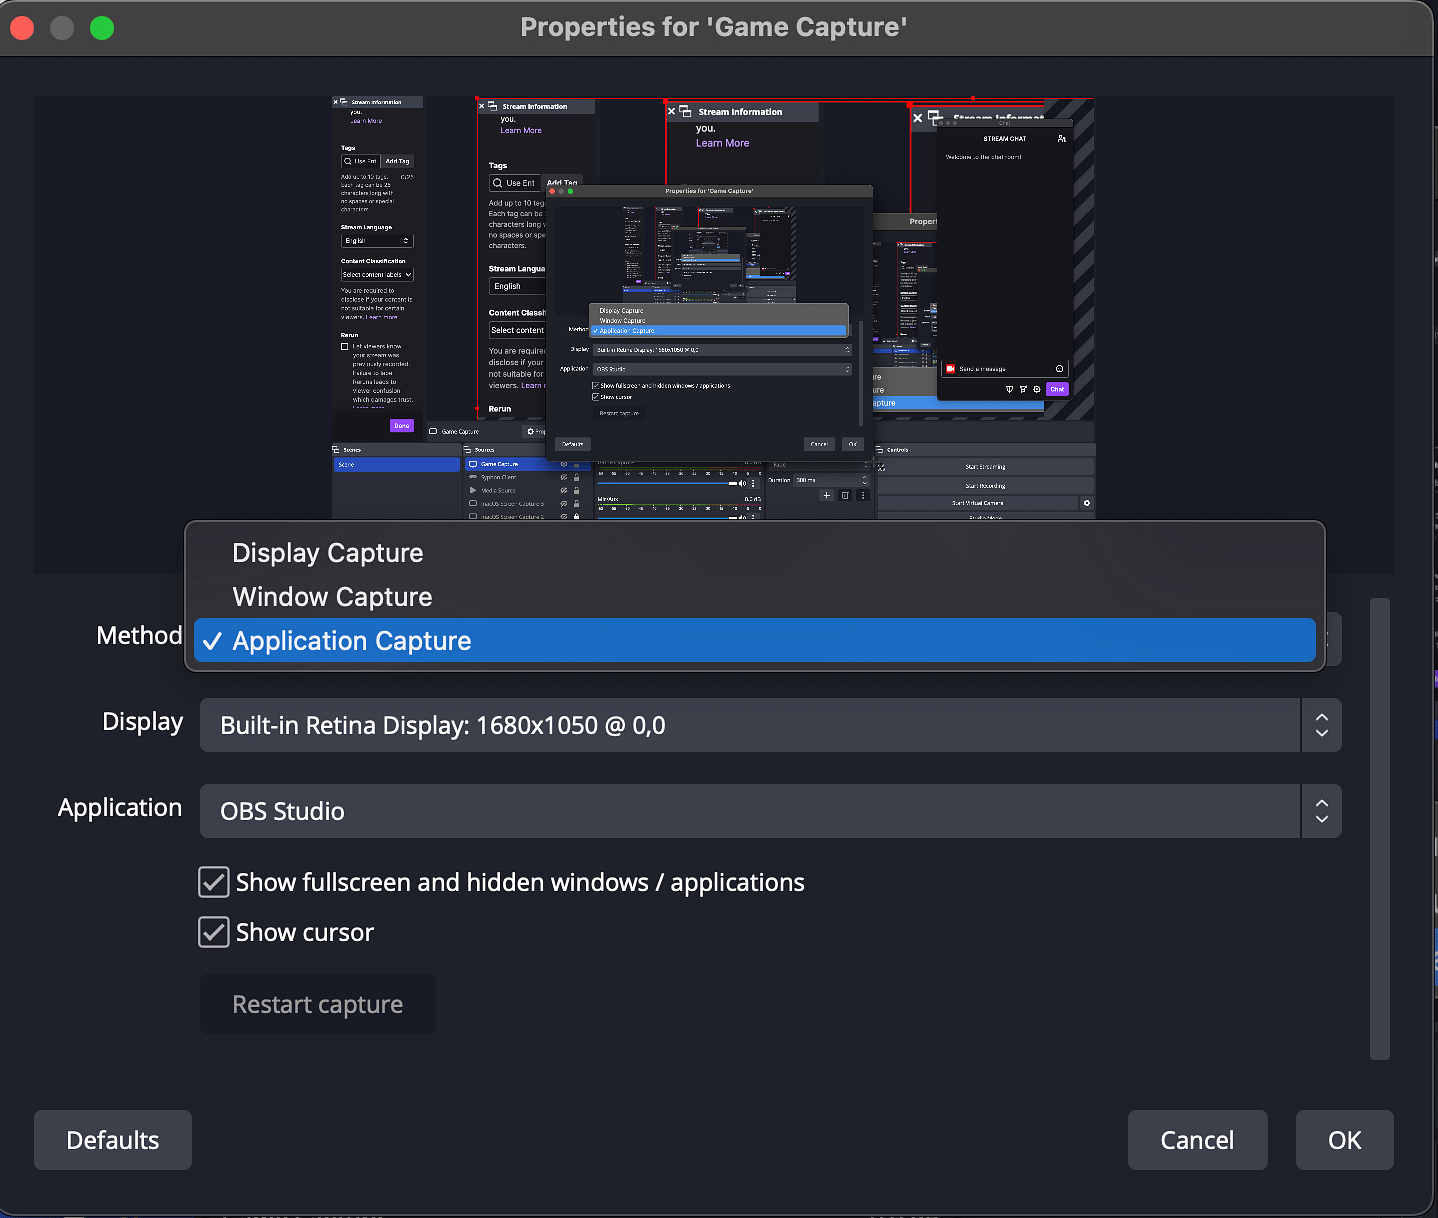 Application Capture in OBS